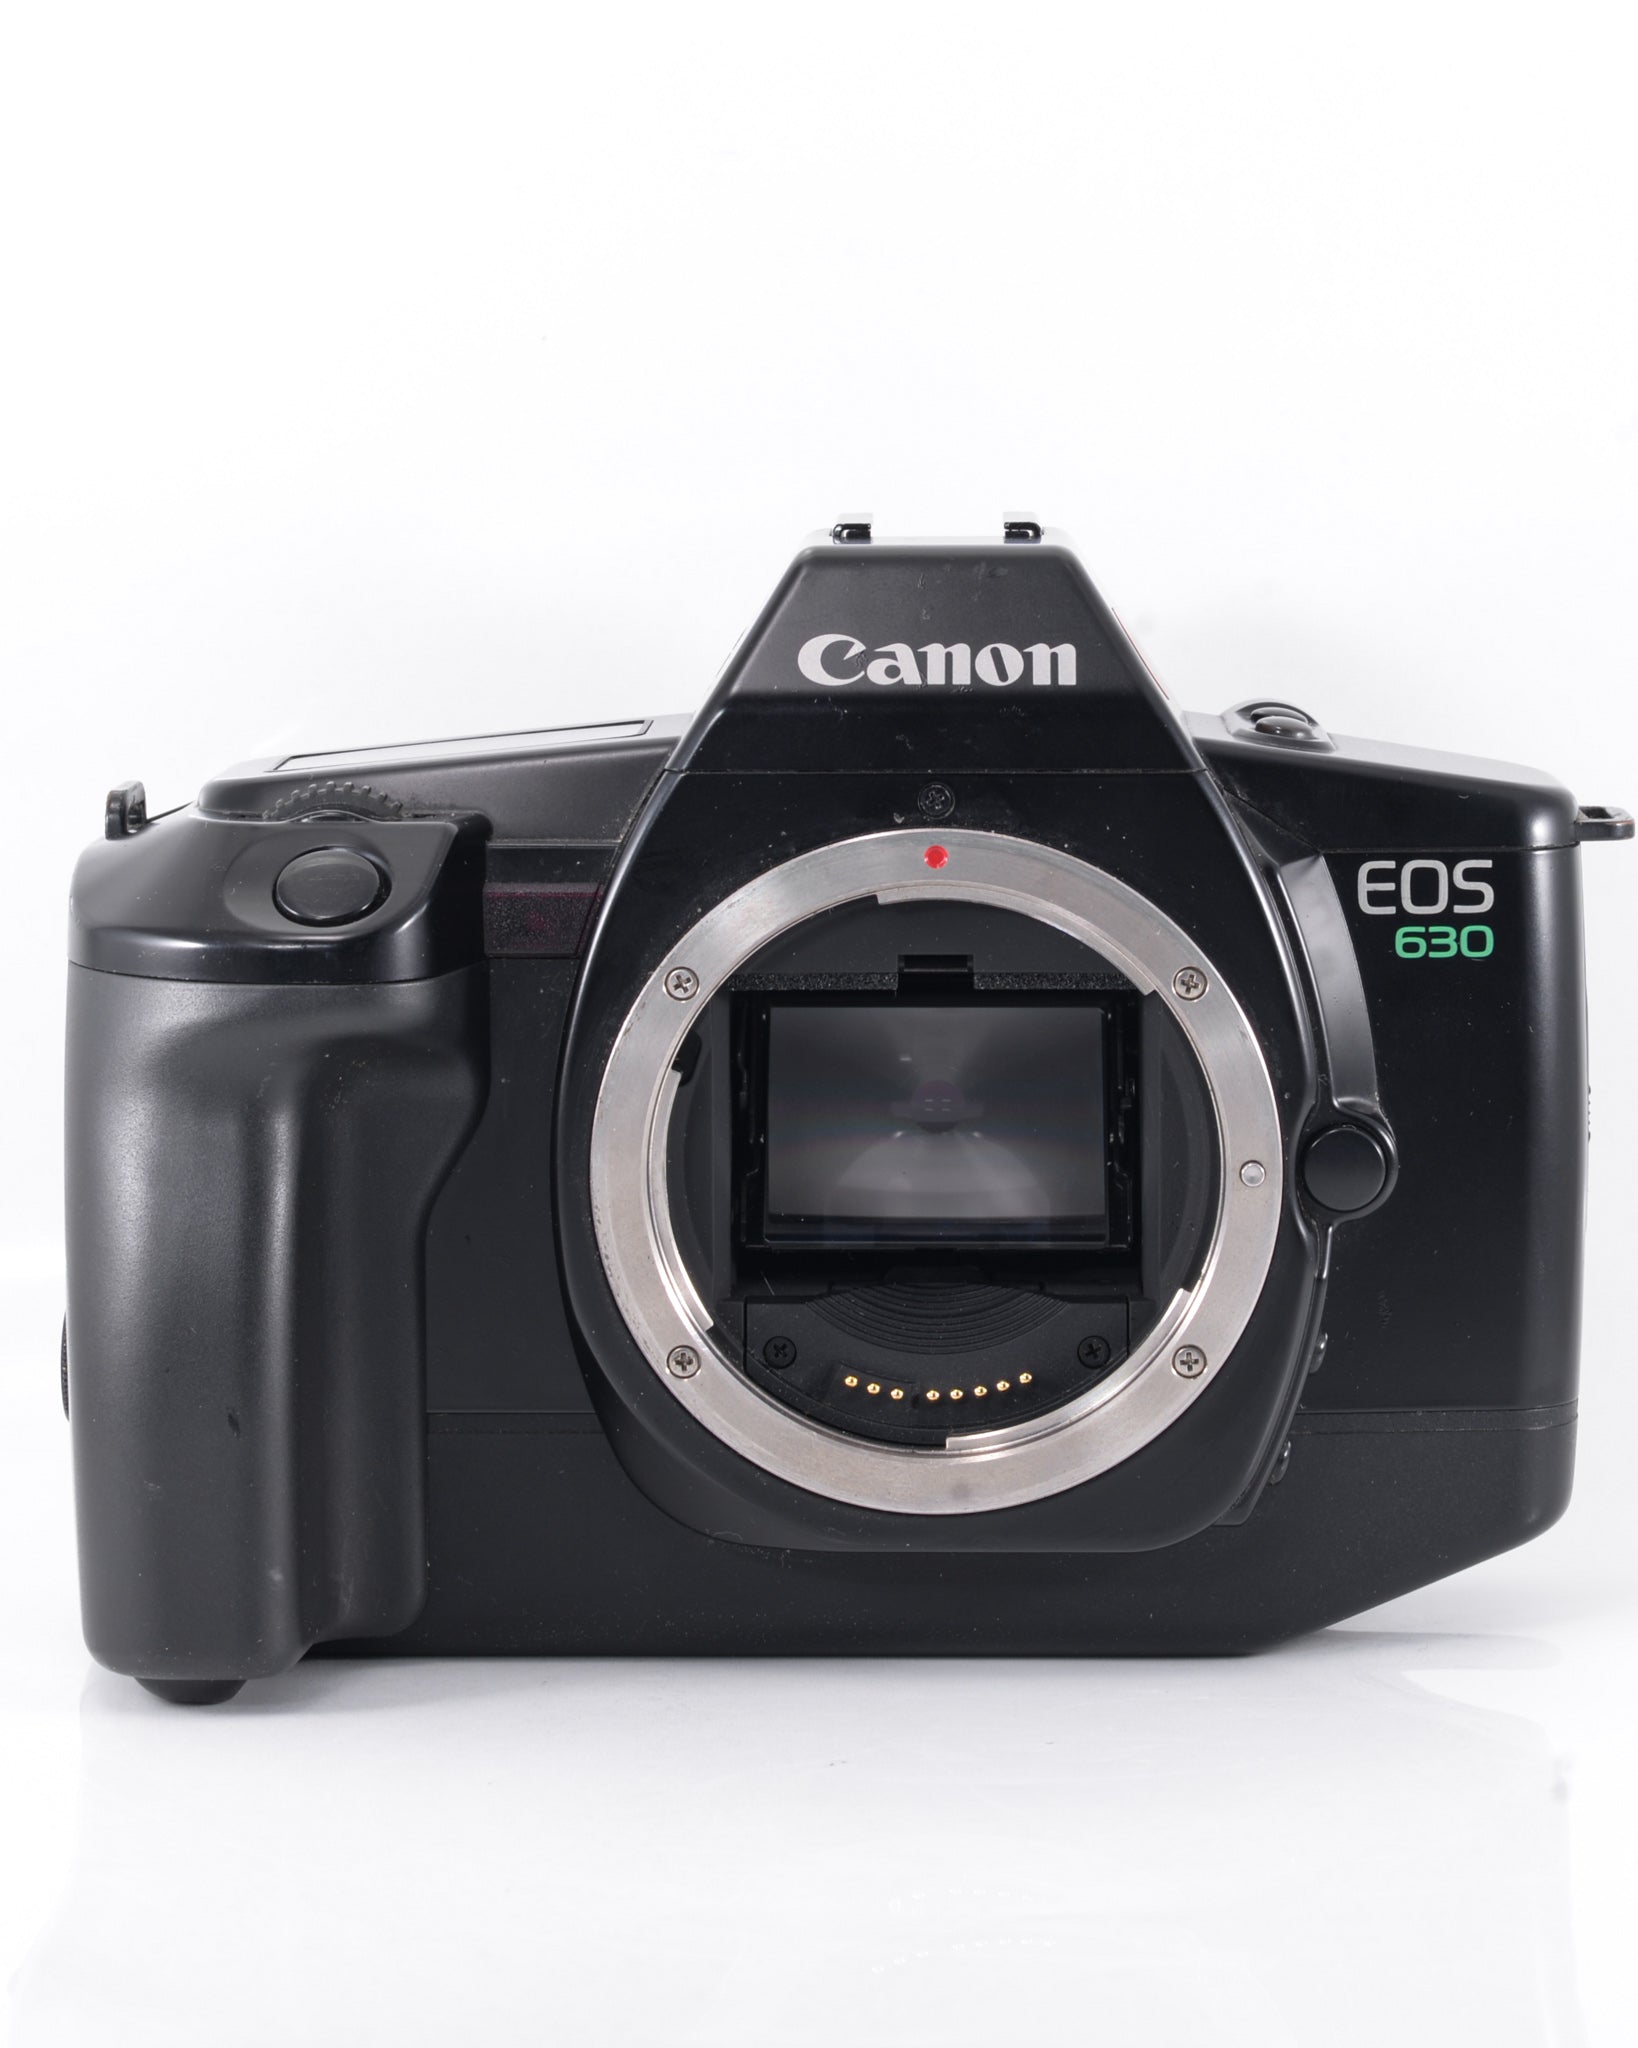 Canon EOS 630 35mm SLR Film camera body only